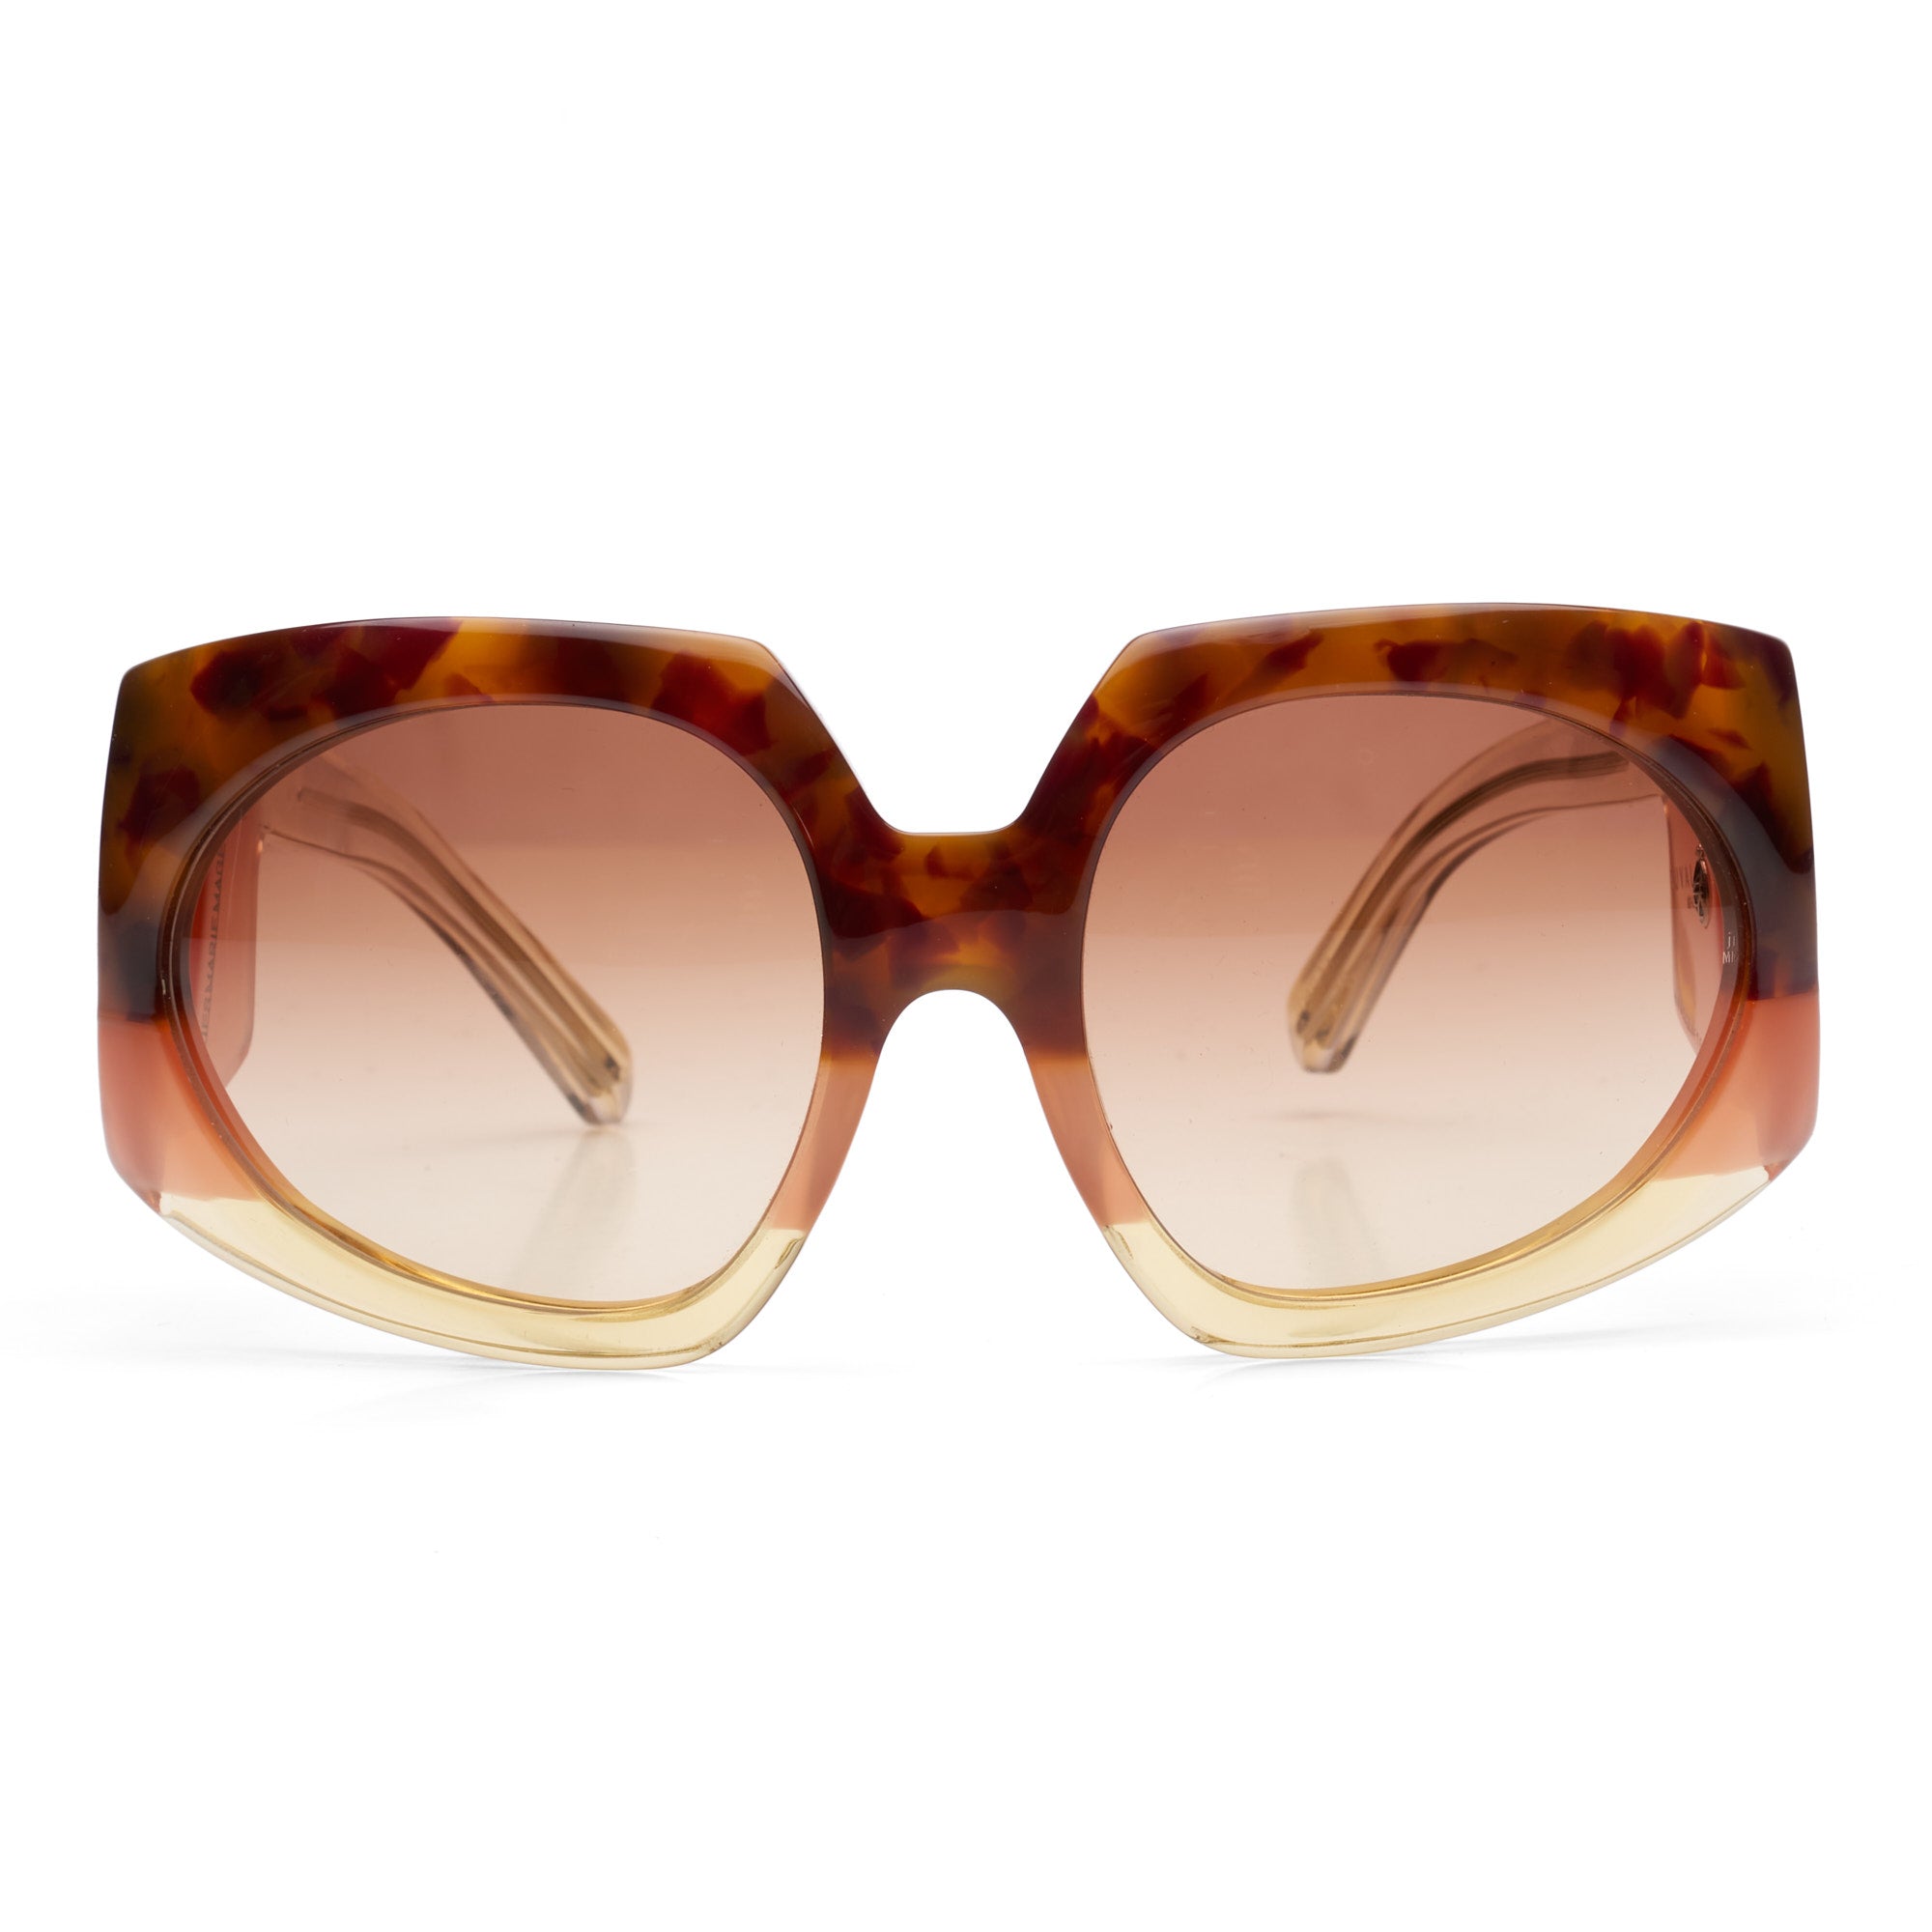 JACQUES MARIE MAGE "Duval" JMMDV-92 Limited Edition 11/150 Sunglasses NEW JACQUES MARIE MAGE